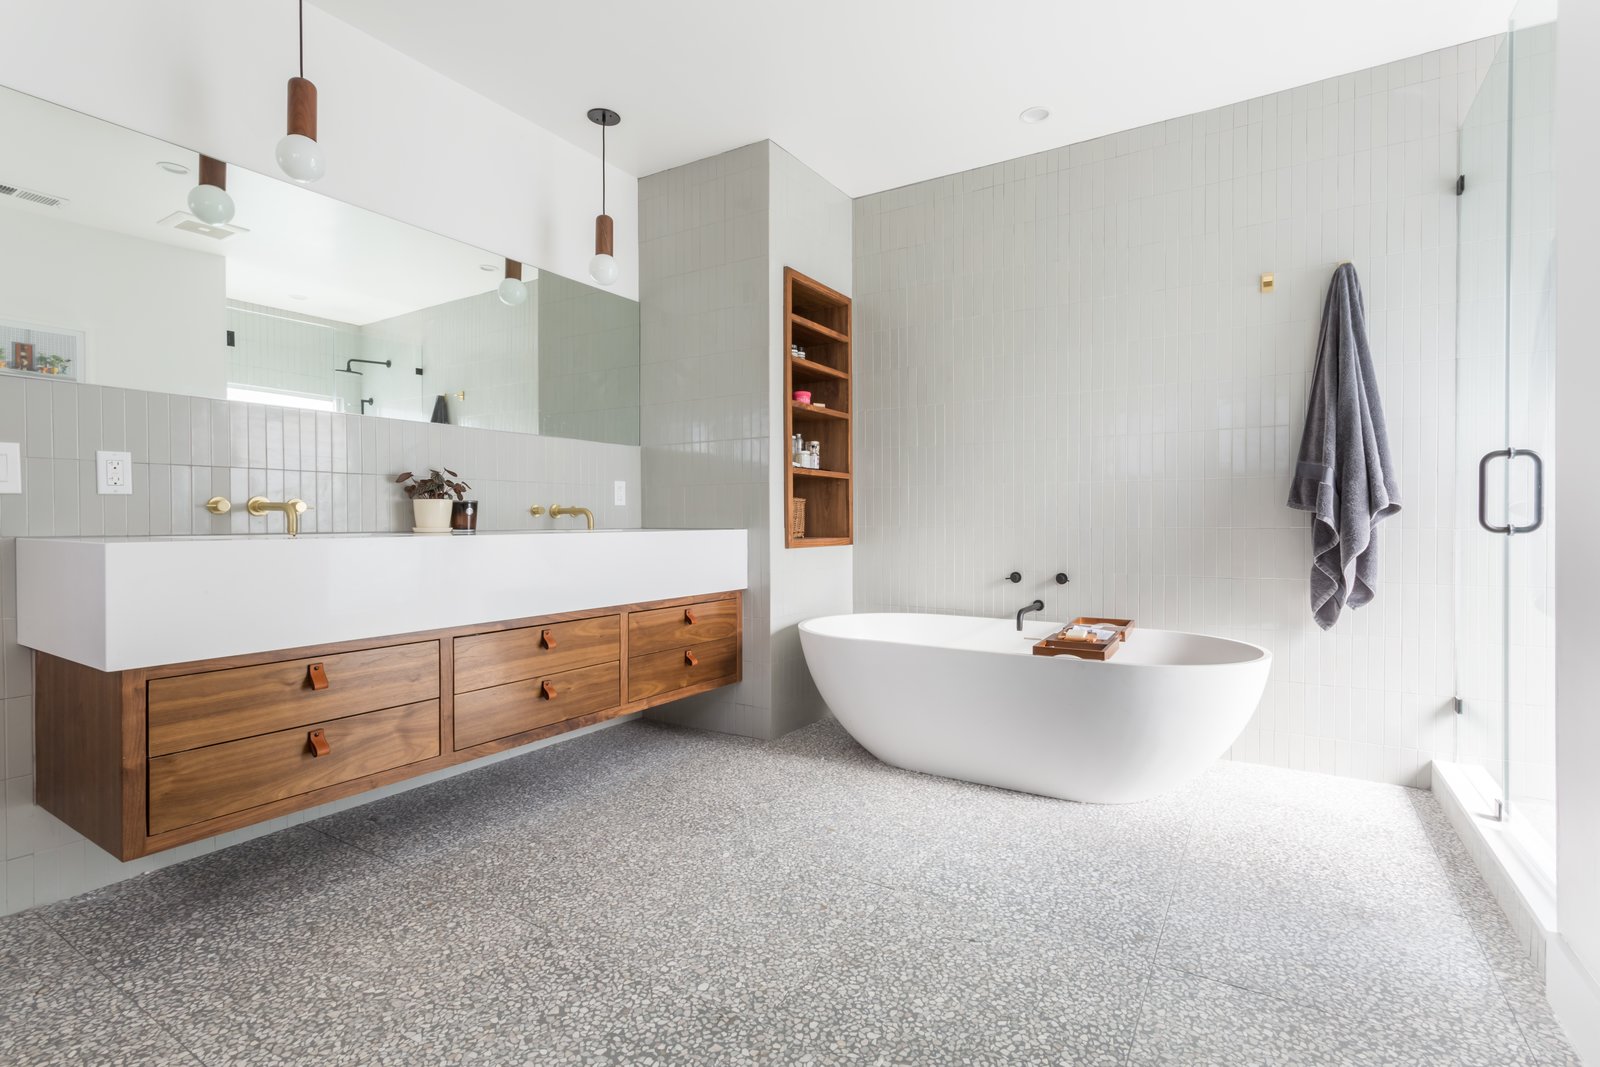 Top Tiling Trends for 2021